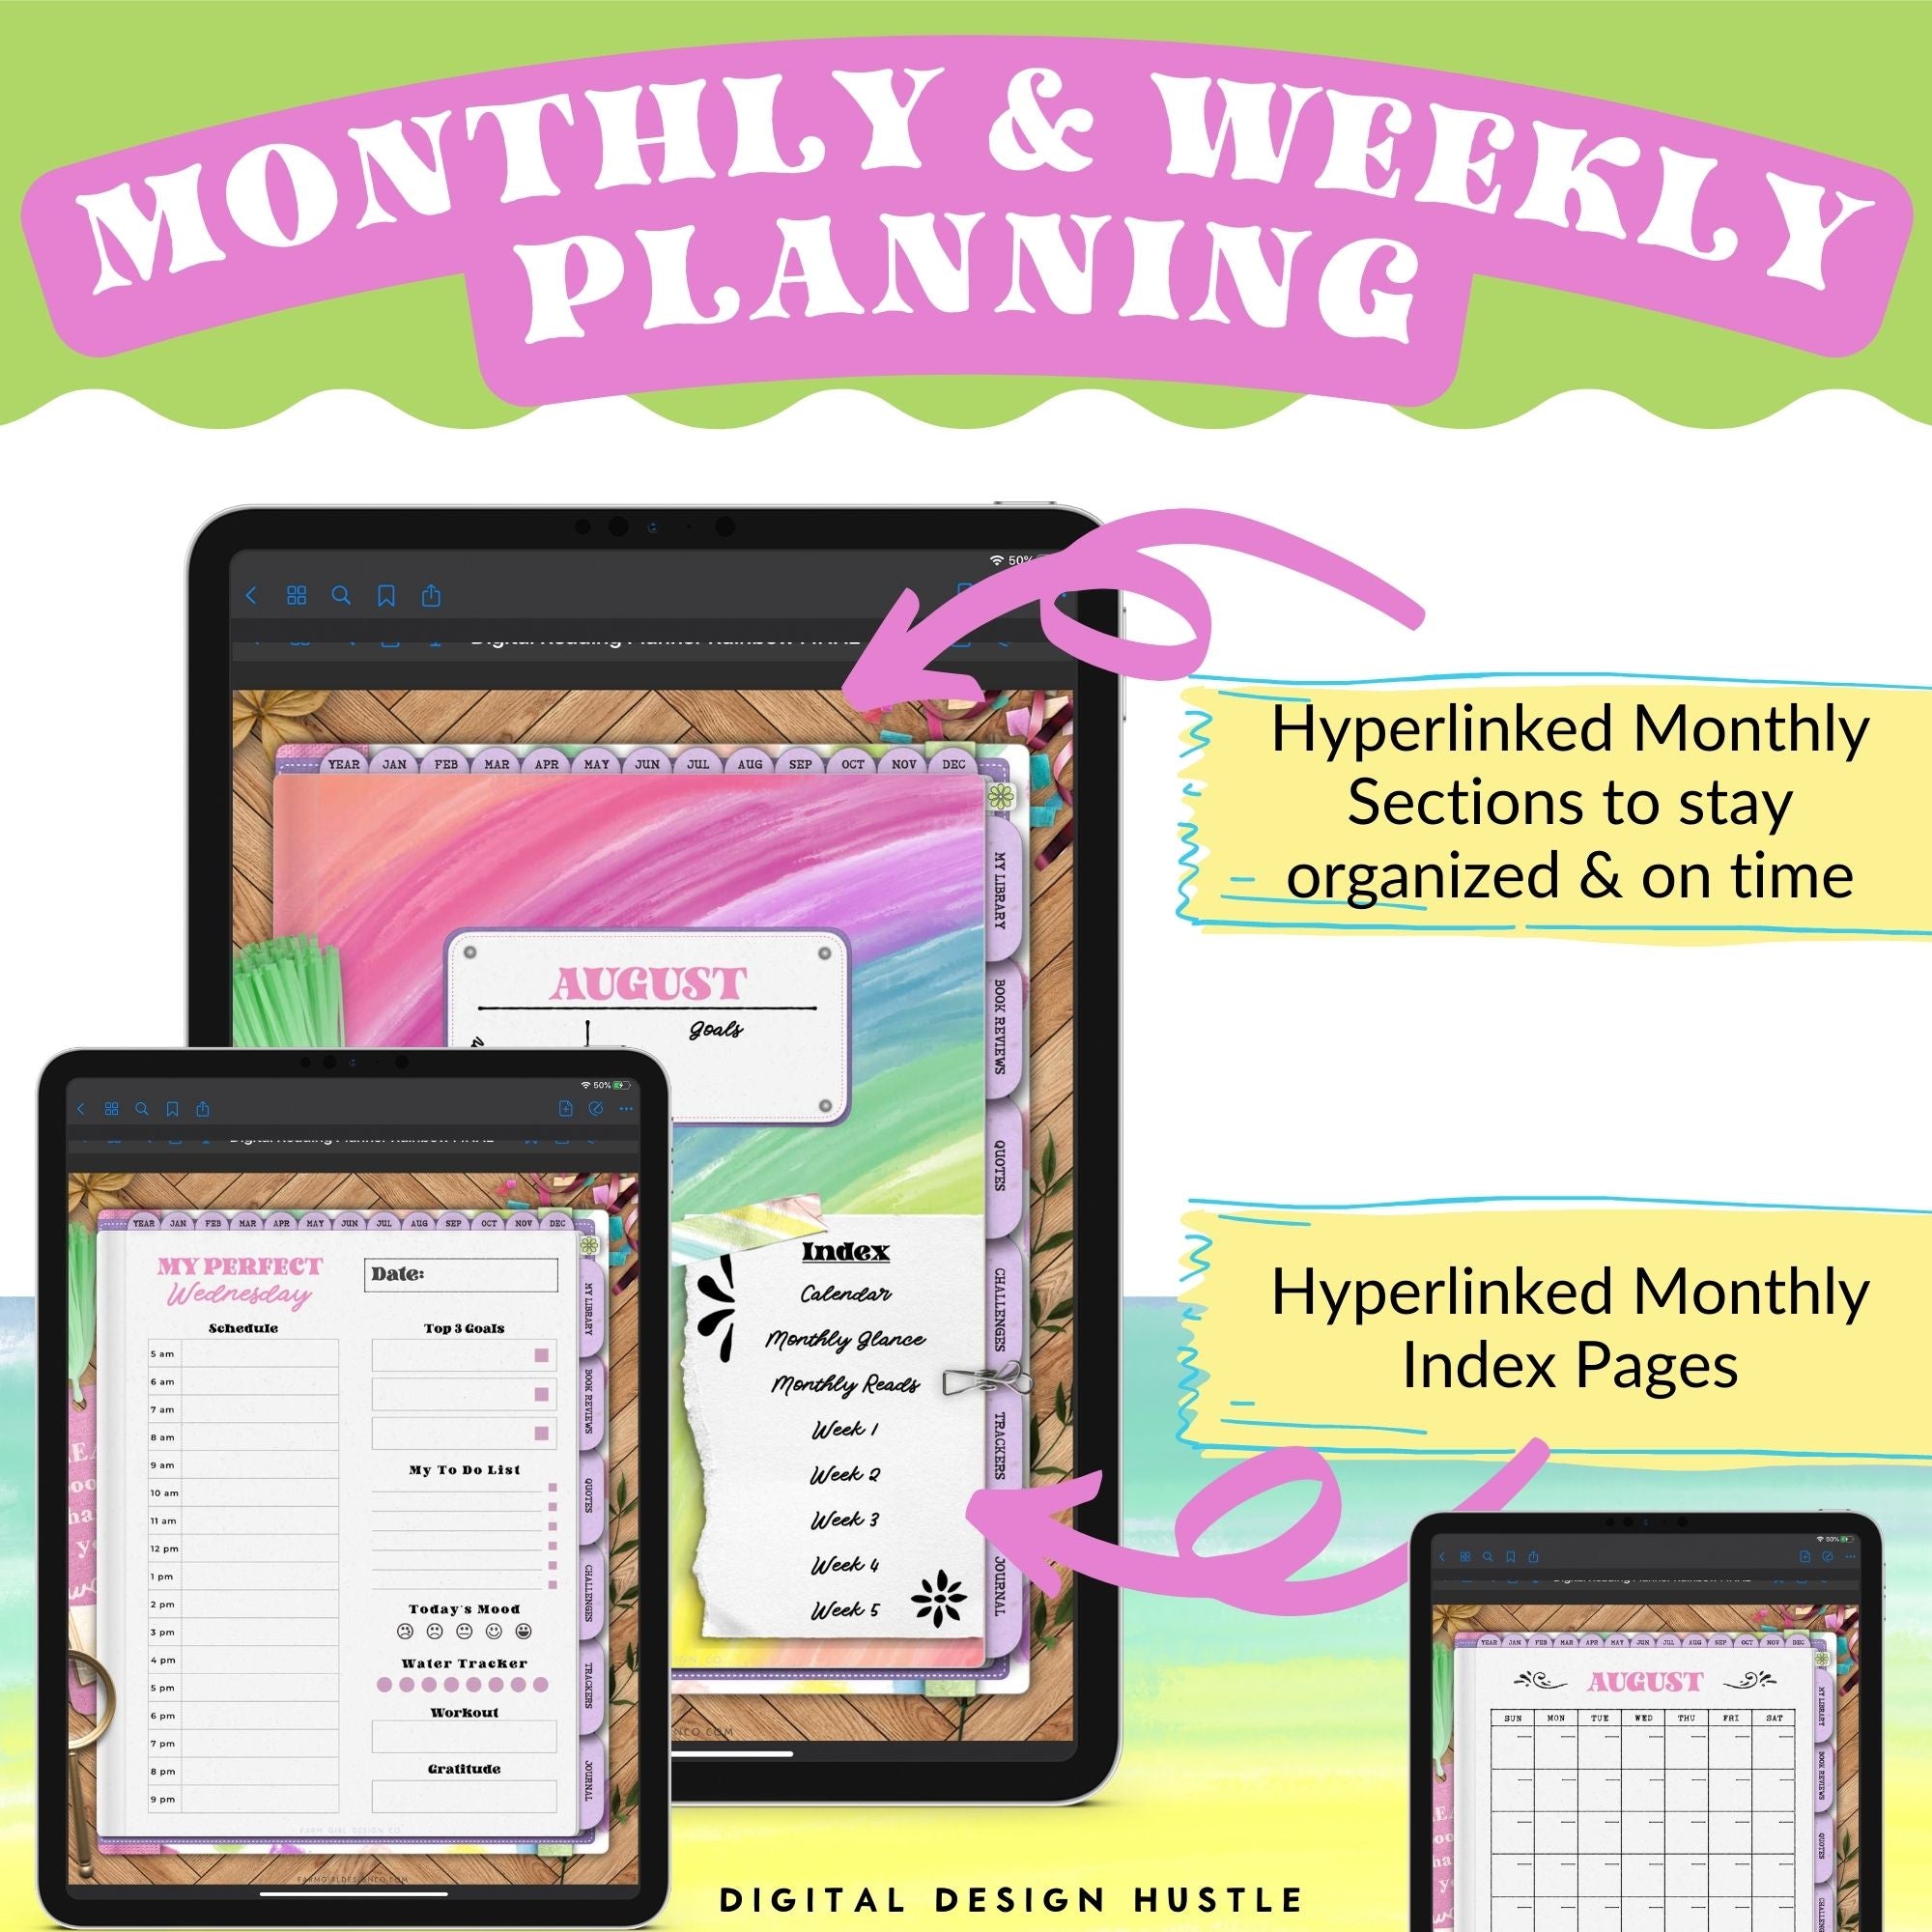 This rainbow digital reading planner is a fun way to track reading progress, take notes in the digital notebook and write thoughts in the digital journal. This planner includes a monthly and daily planner and reading logs, book trackers, and more. Keep track of all your reading lists, activities, goals too.